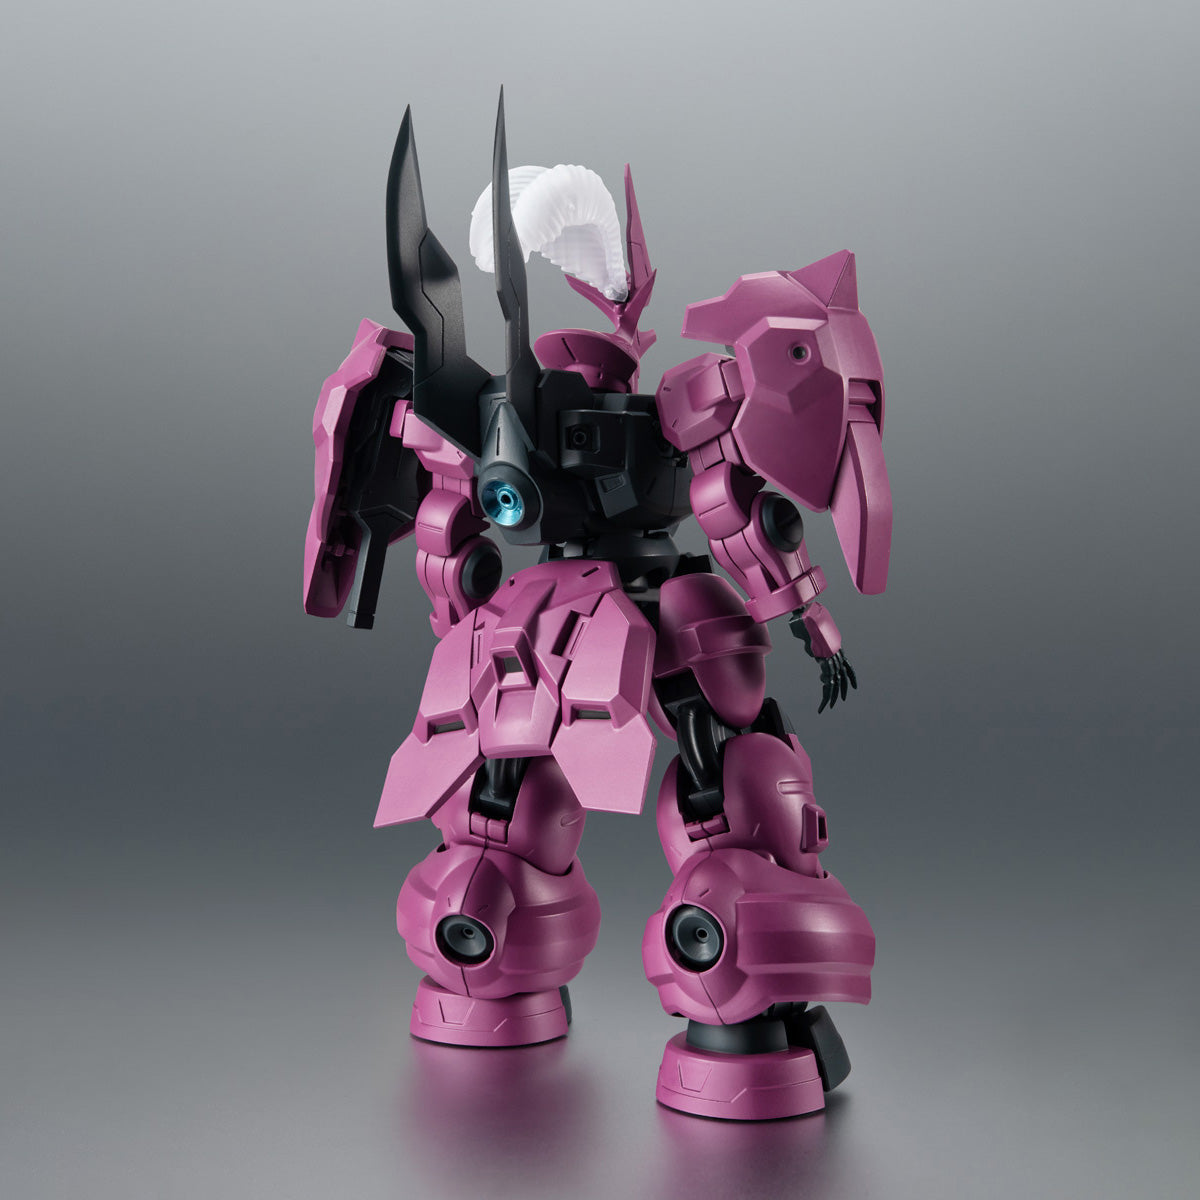 Bandai - The Robot Spirits [SIDE MS] - Mobile Suit Gundam: The Witch from Mercury - MD-0032G Guel's Dilanza (Ver. A.N.I.M.E.) - Marvelous Toys